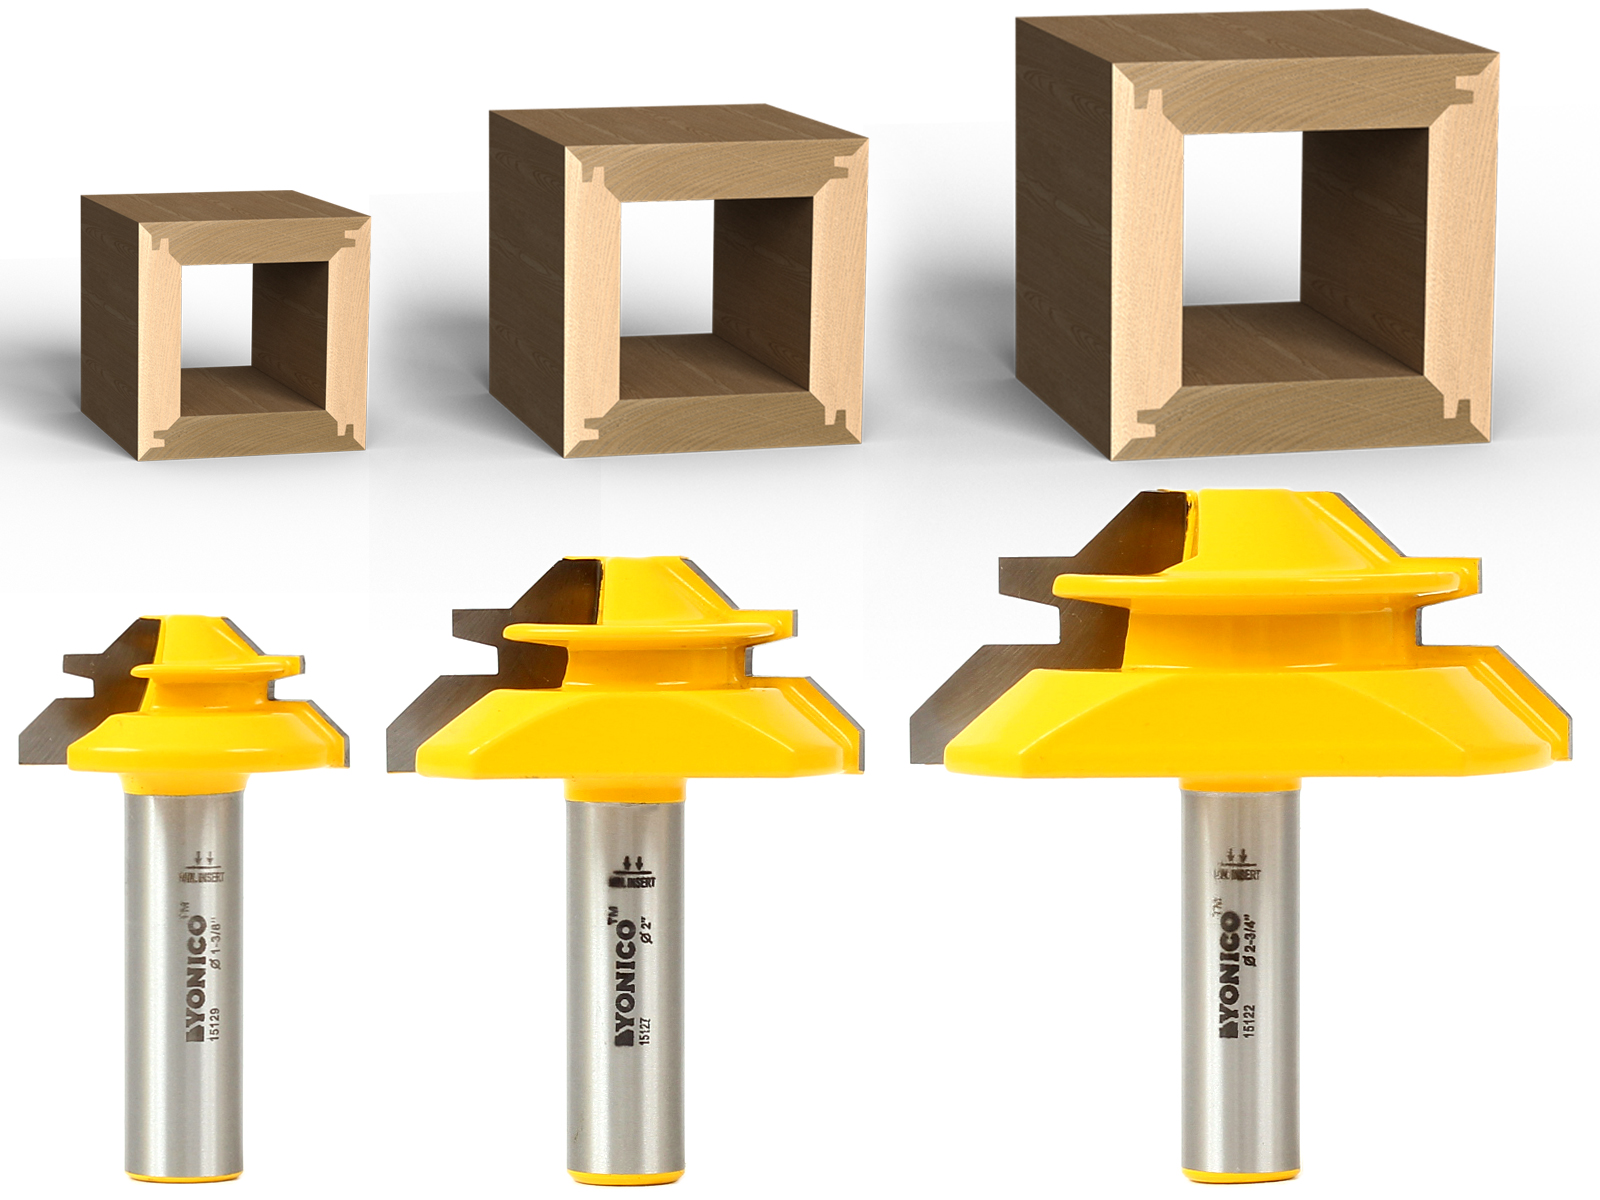 Up to 3/4" Stock Lock Miter Router Bit 45 Degree Yonico 15127q 1/4" Shank 